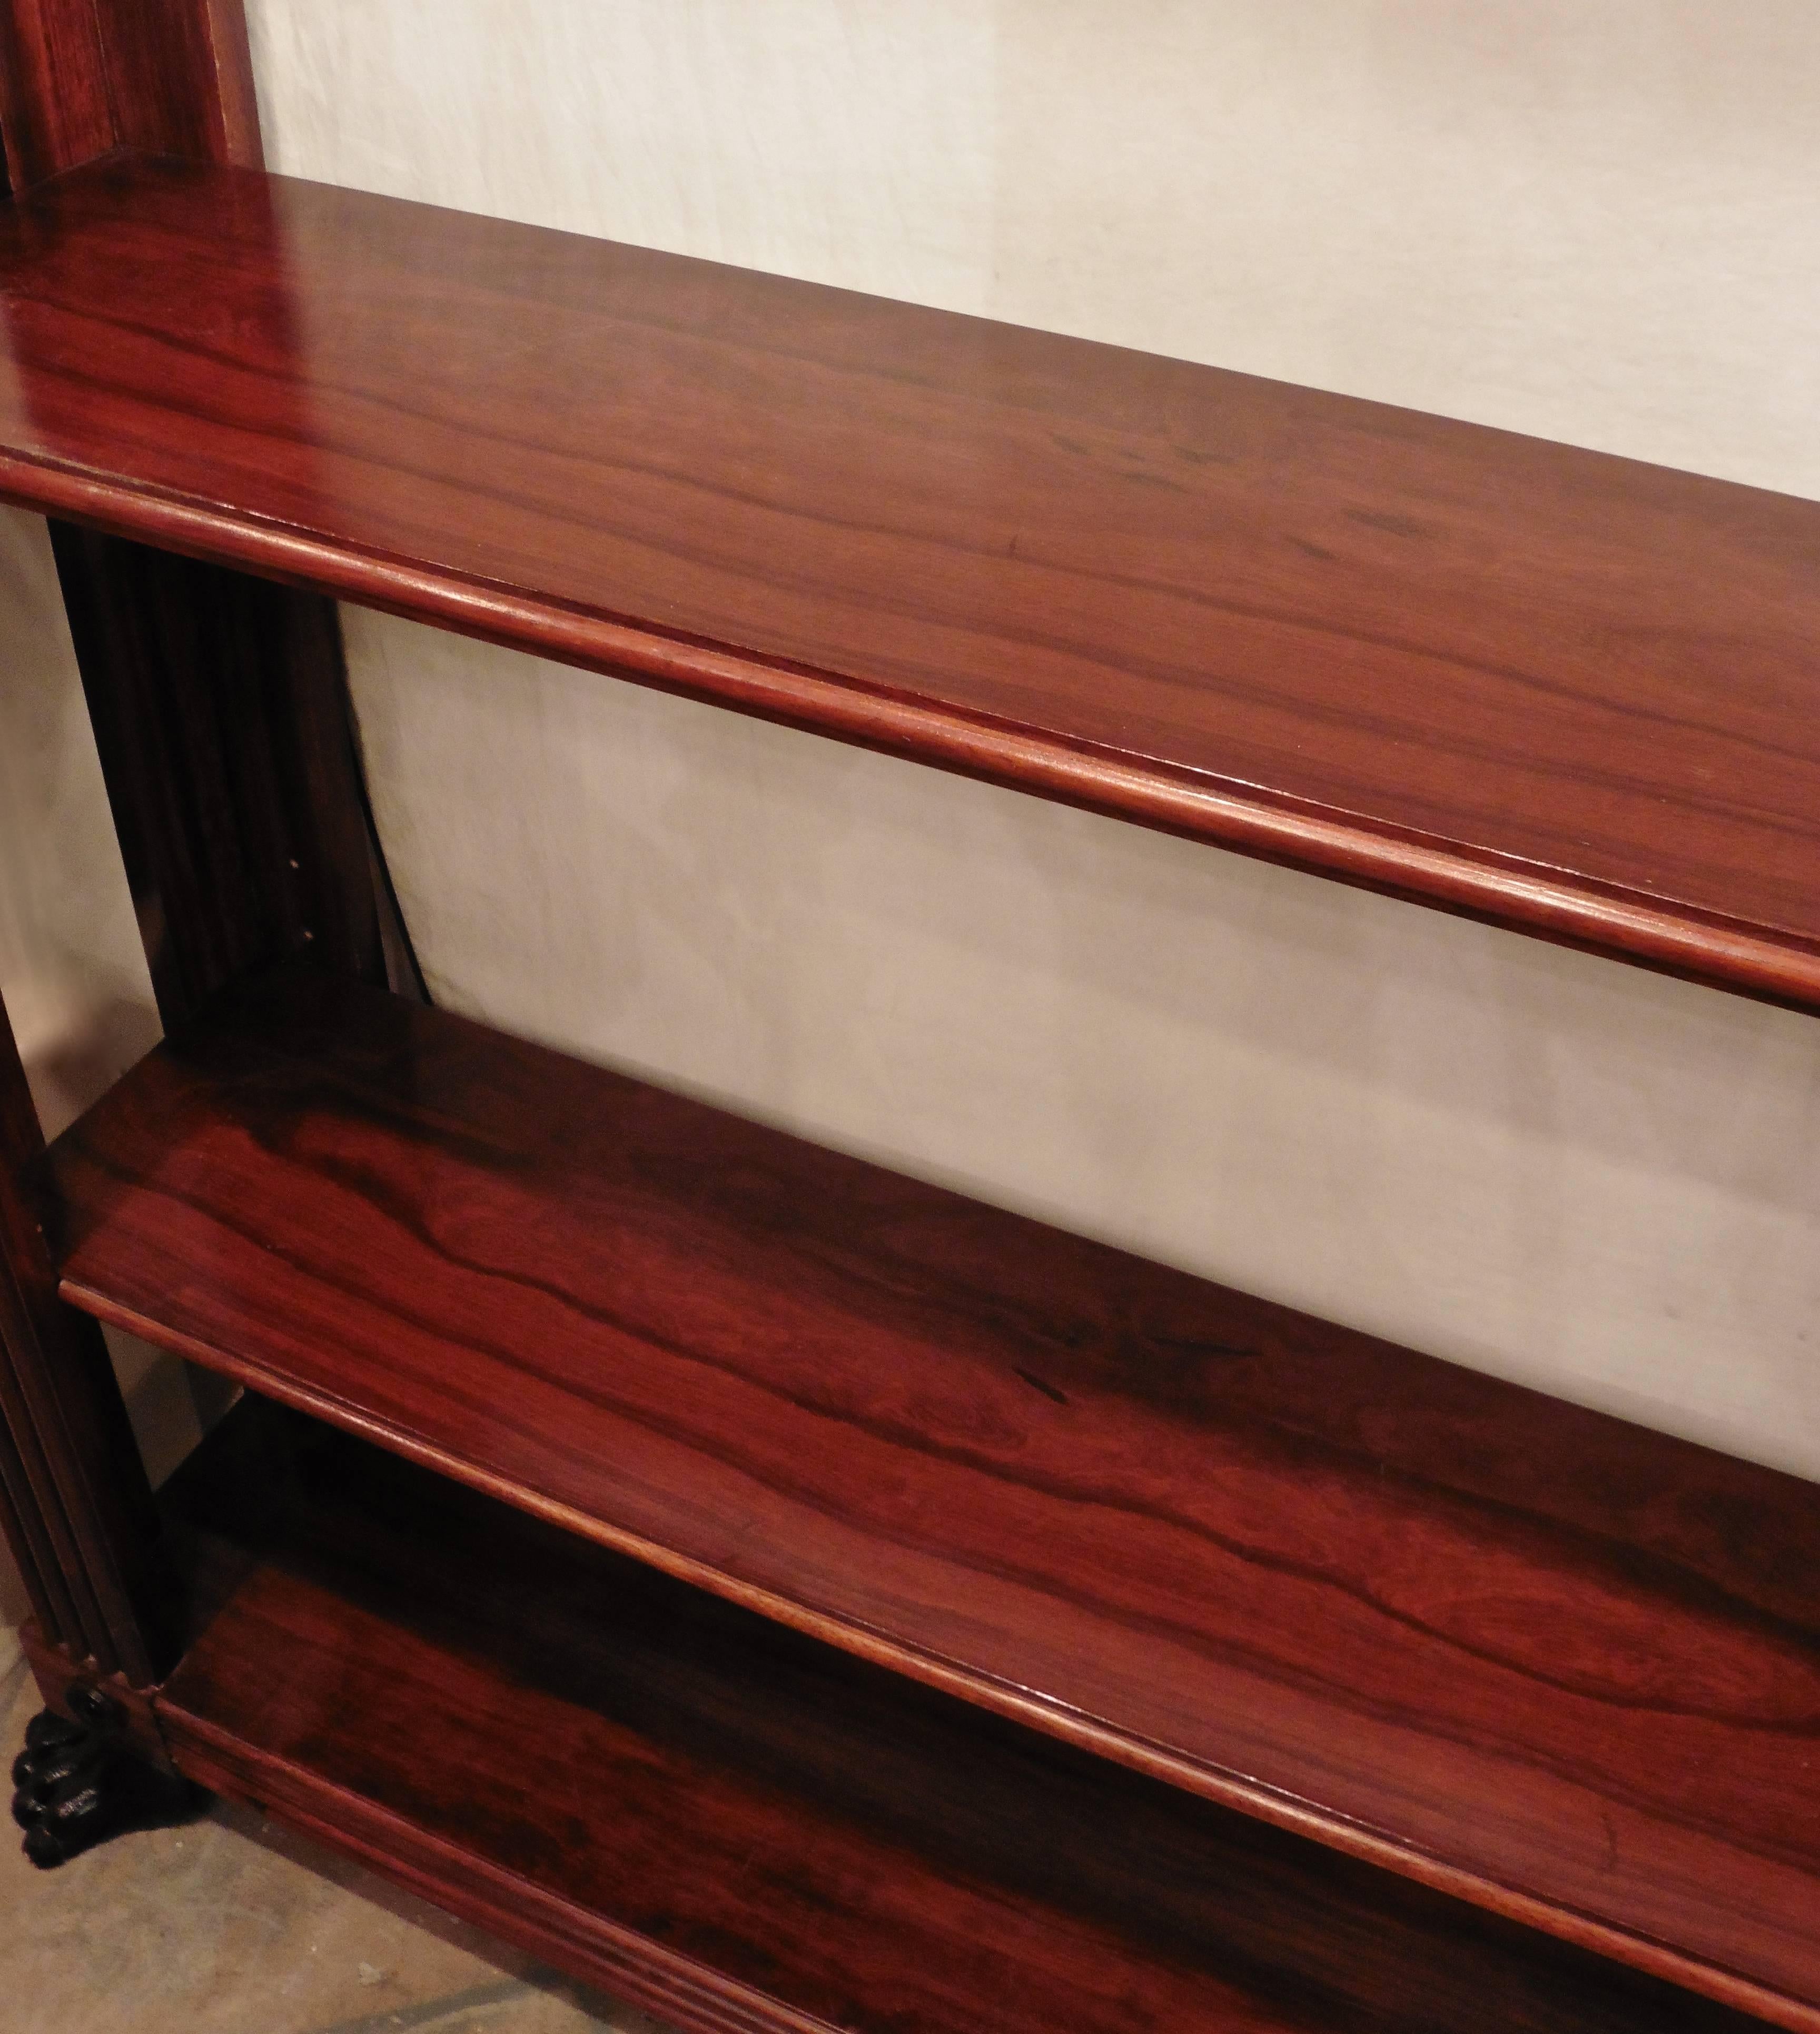 Pair of Regency Style Neoclassical Mahogany Shelves, circa 1950 For Sale 1